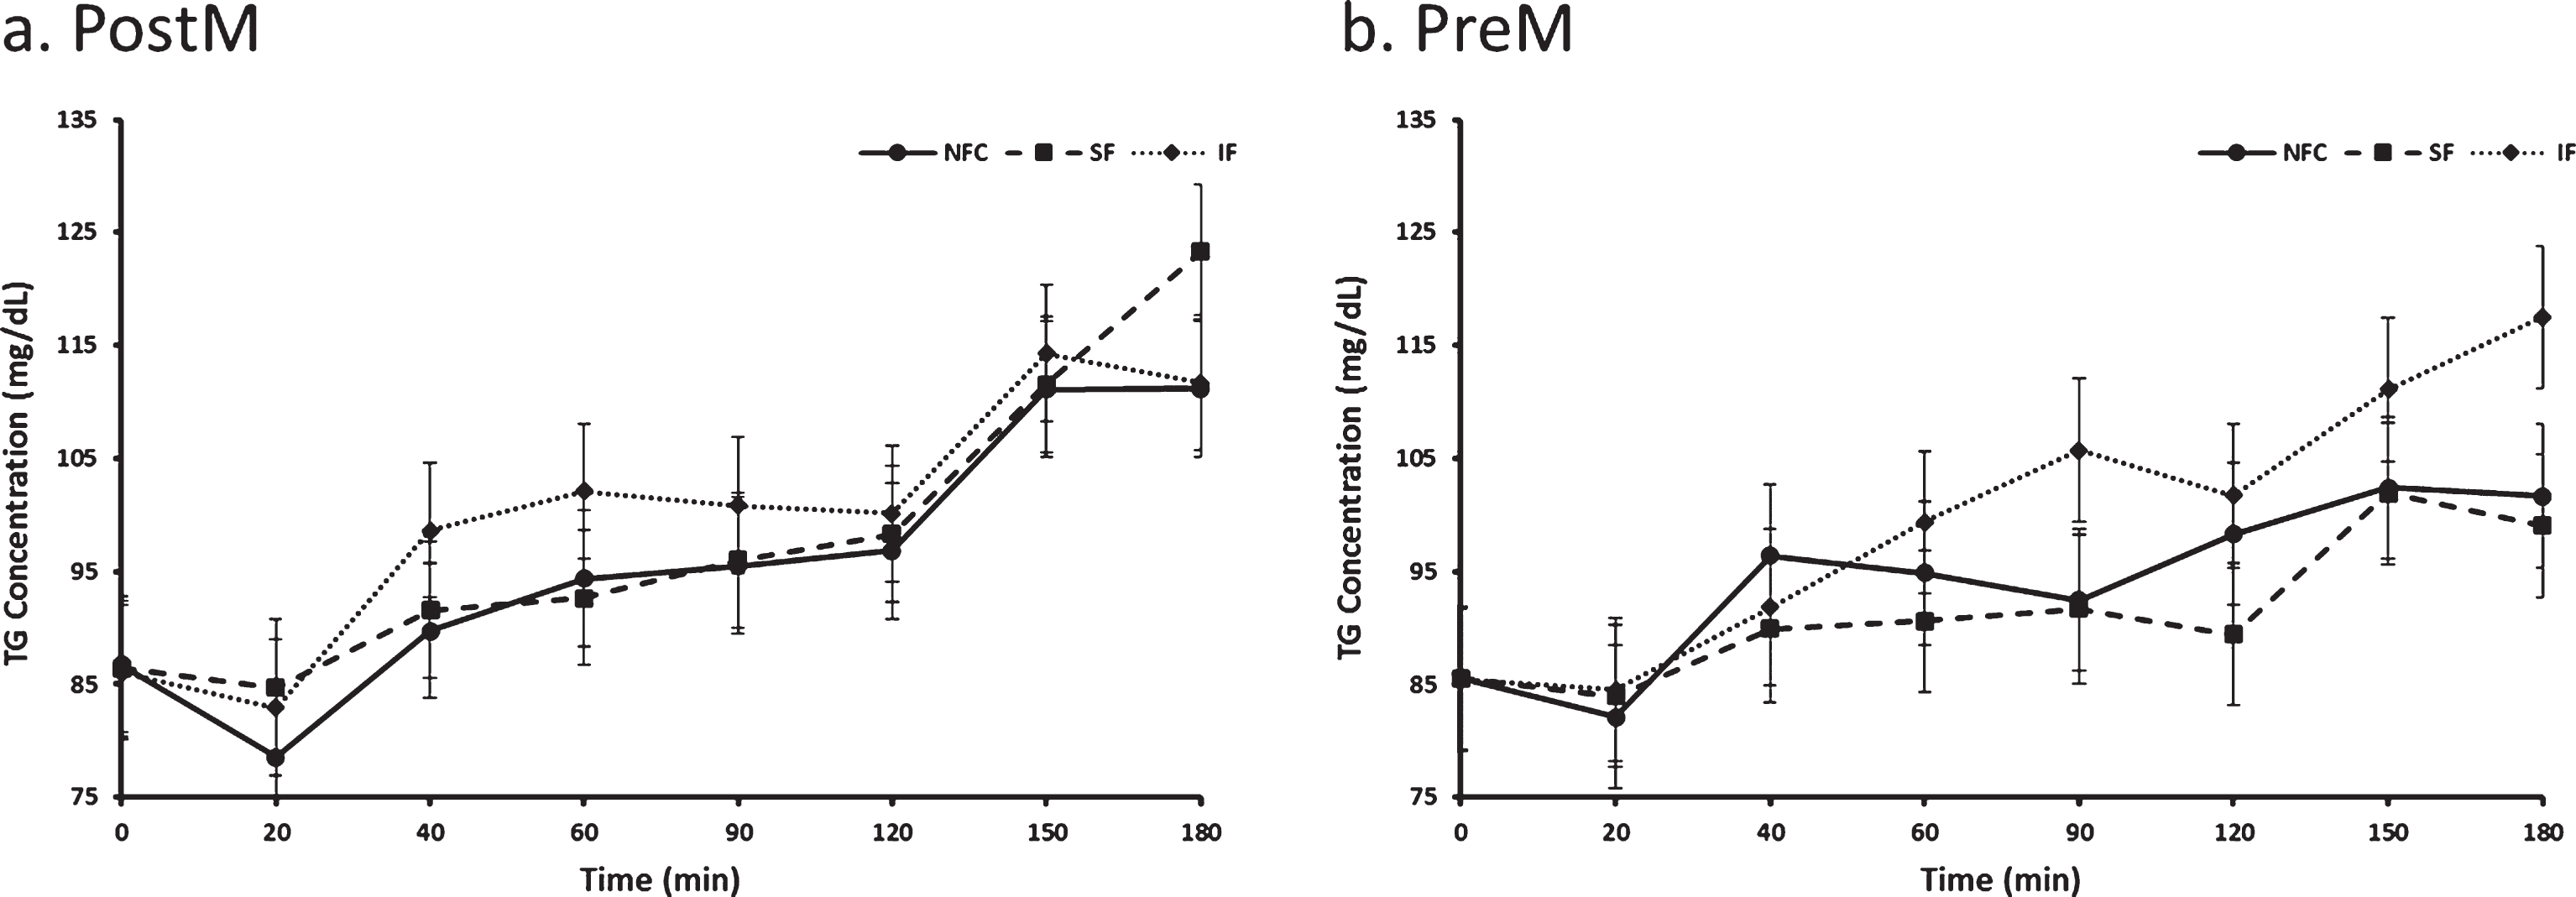 Variation of triglyceride responses to NFC-No Fiber Control, IF-Insoluble Fiber, SF-Soluble Fiber meals in Postmenopausal (PostM, n = 10) and Premenopausal (PreM, n = 9) women (Figs. 8a and b, respectively). Values are the means±SEM at each time point. Different letters at the same time point denotes significant difference, p < 0.05.